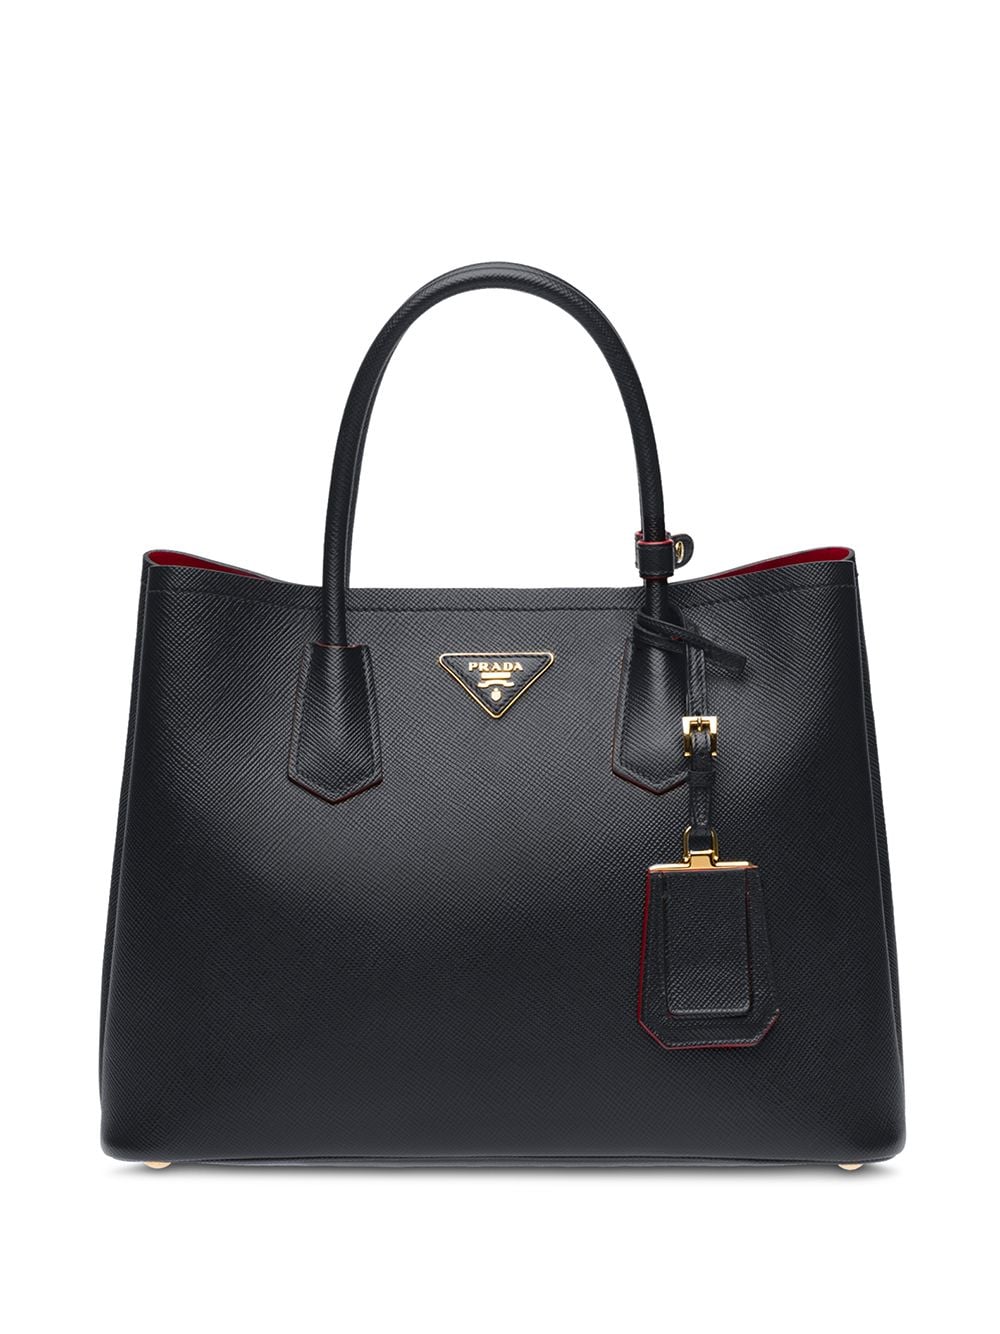 Prada Saffiano Cuir Double red Large Tote bag 